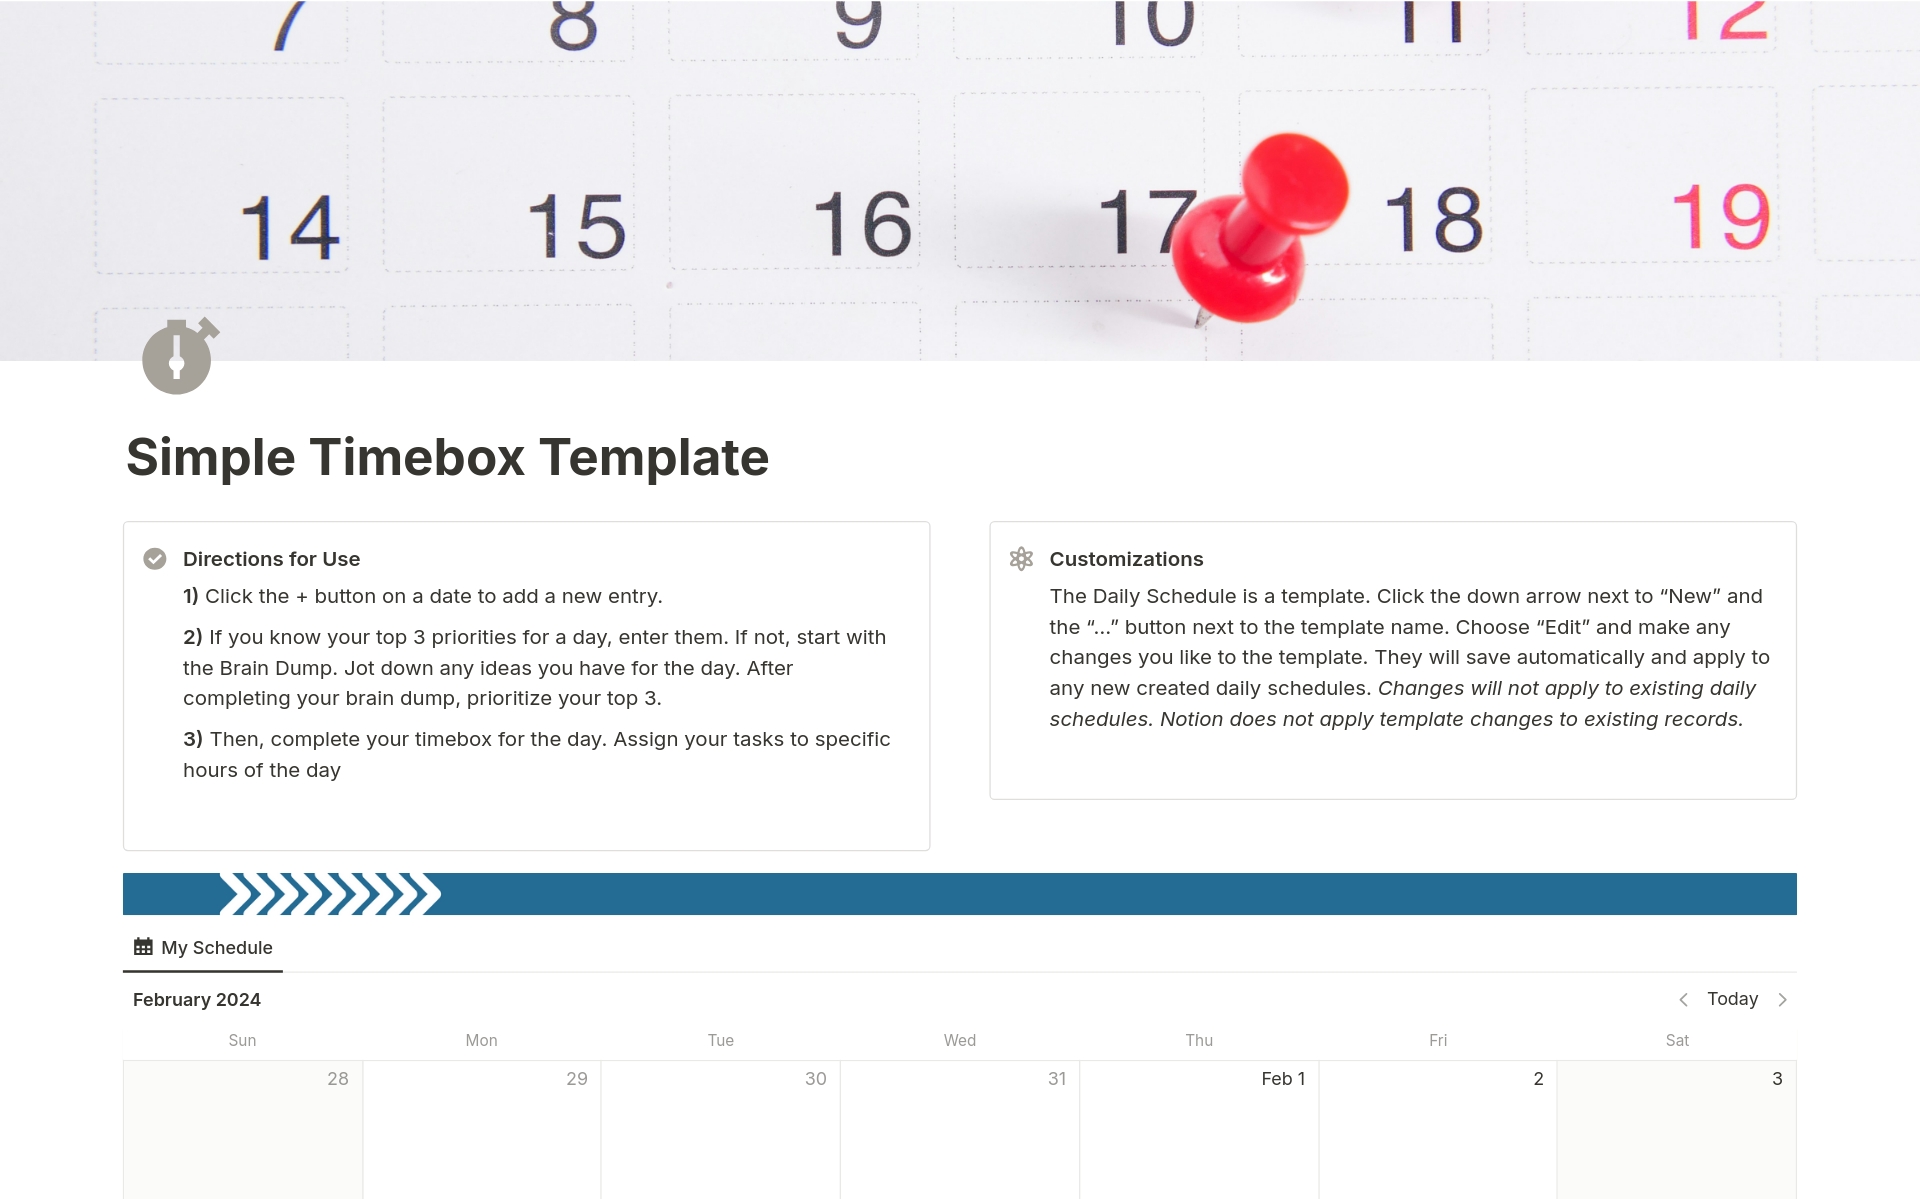 Timeboxing is the most effective time management technique. This no-frills, simple template will help you schedule each day, without distractions. So you can get busy doing instead of planning. 